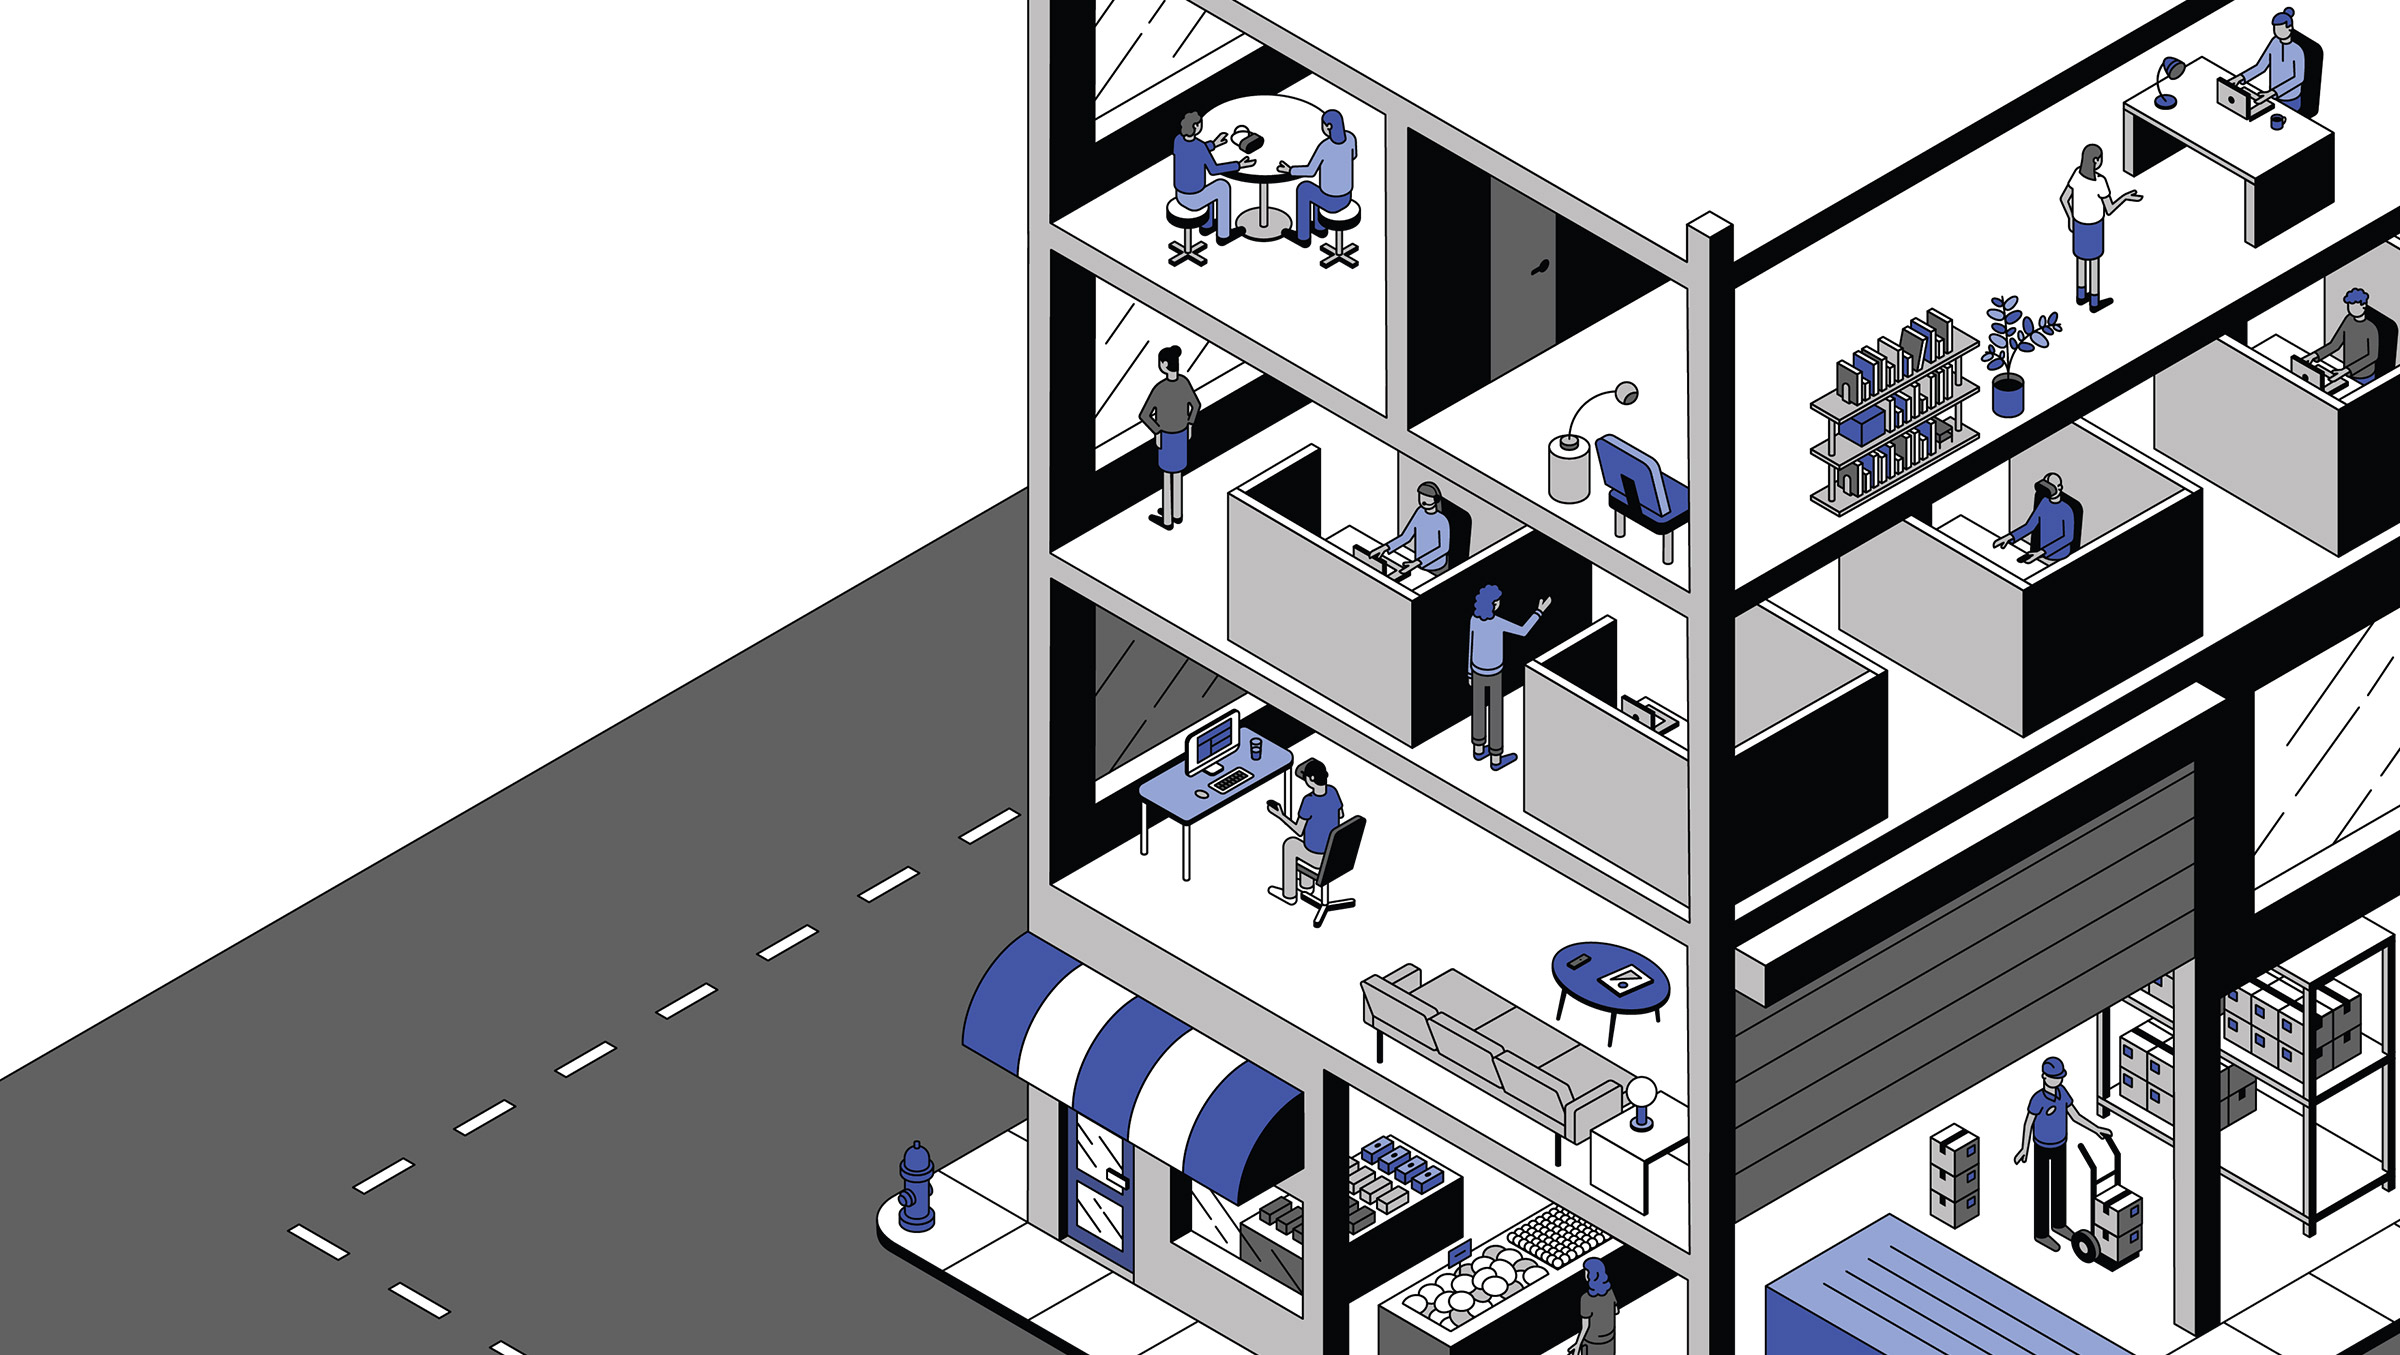 illustration of people working in a buildling